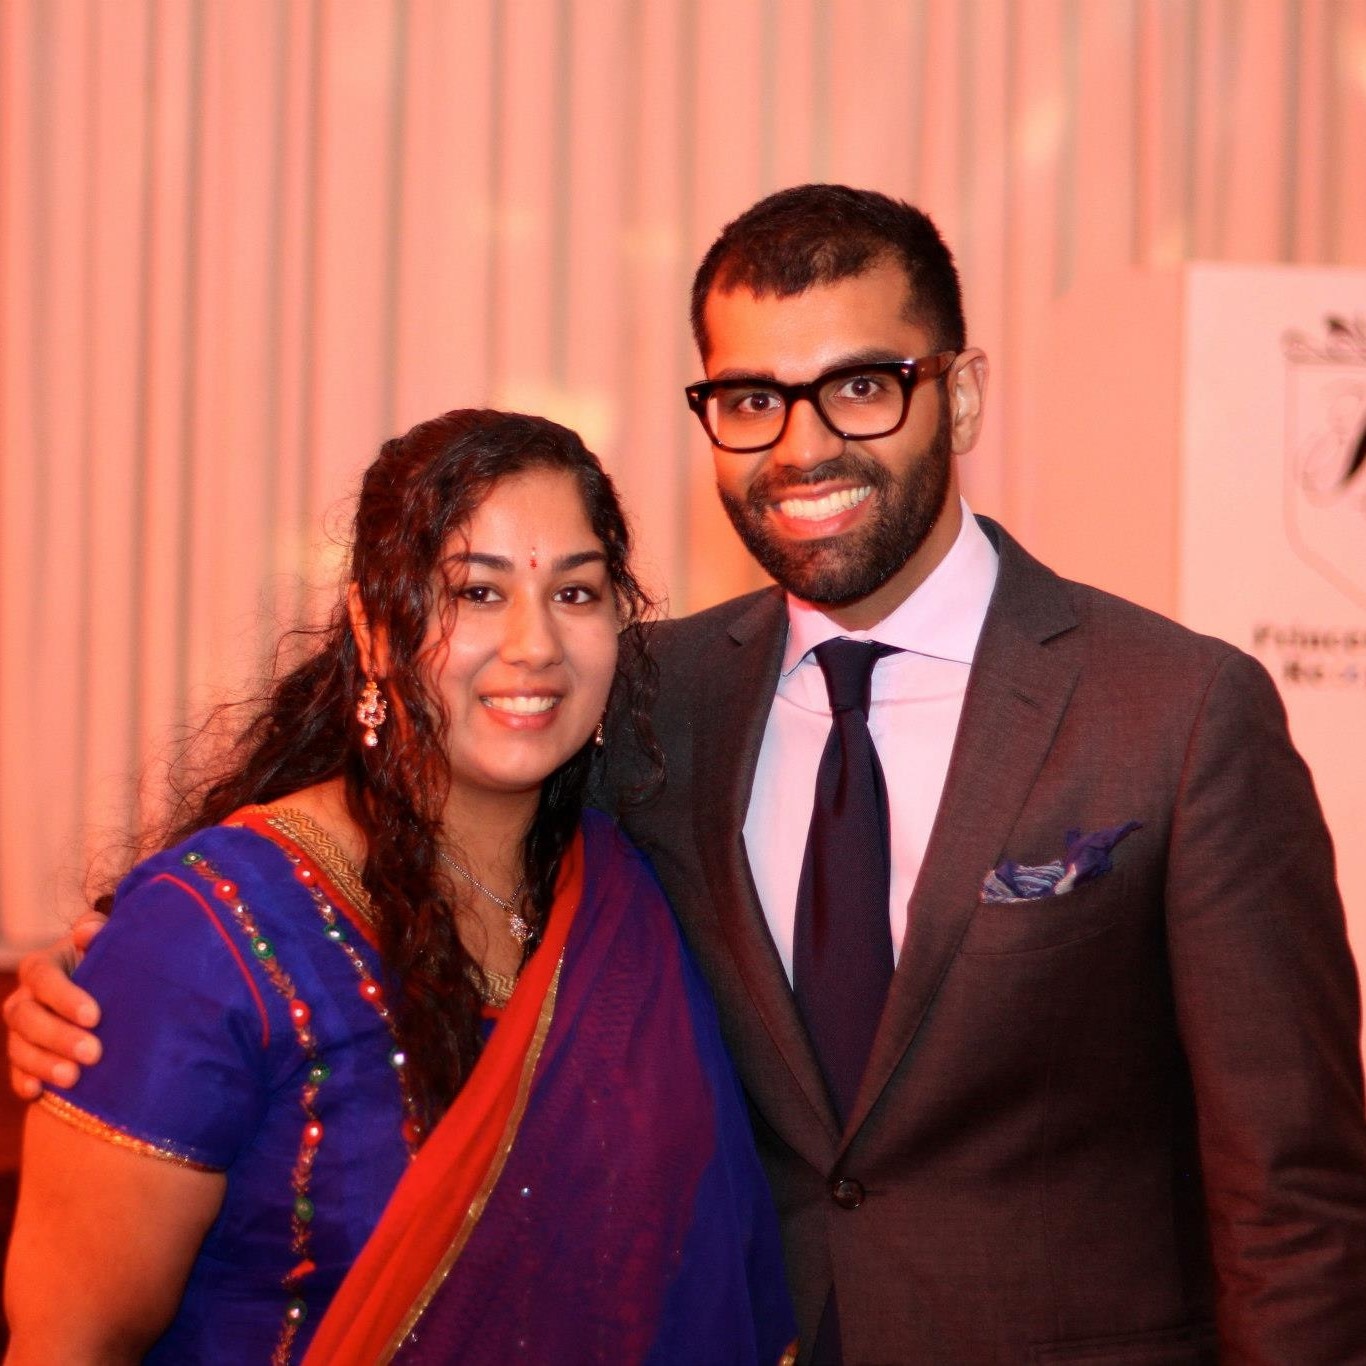 Tarang Chawla (right) with his sister Nikita, who was murdered by her husband in 2015.